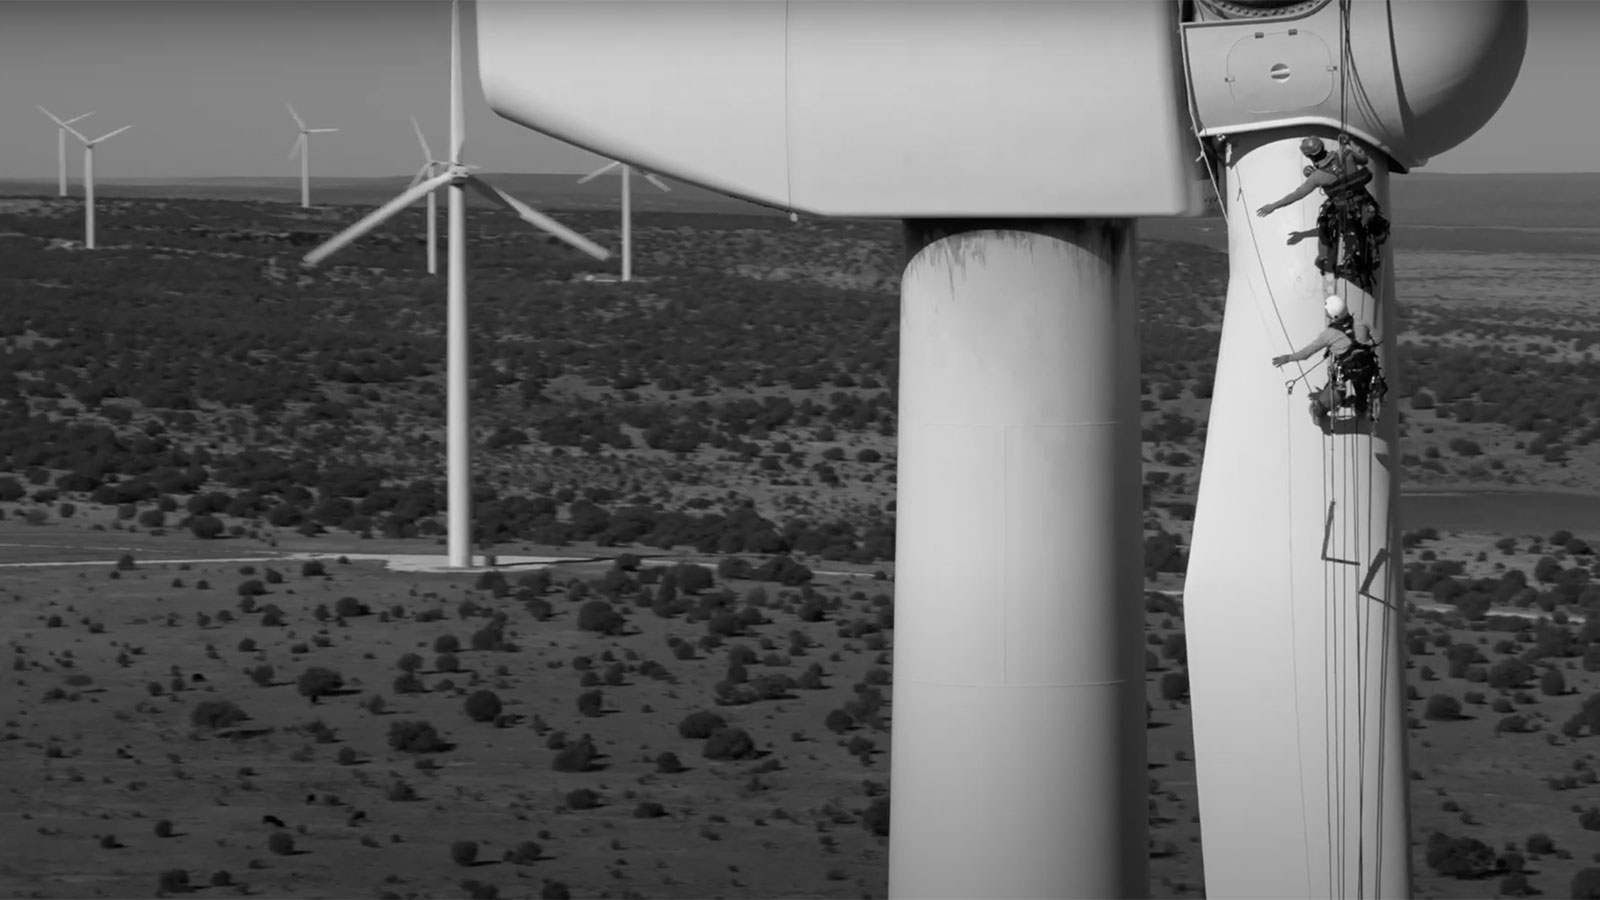 A screenshot from a video targeting builders for climate projects. Shows a landscape with wind turbines up close and in the distance